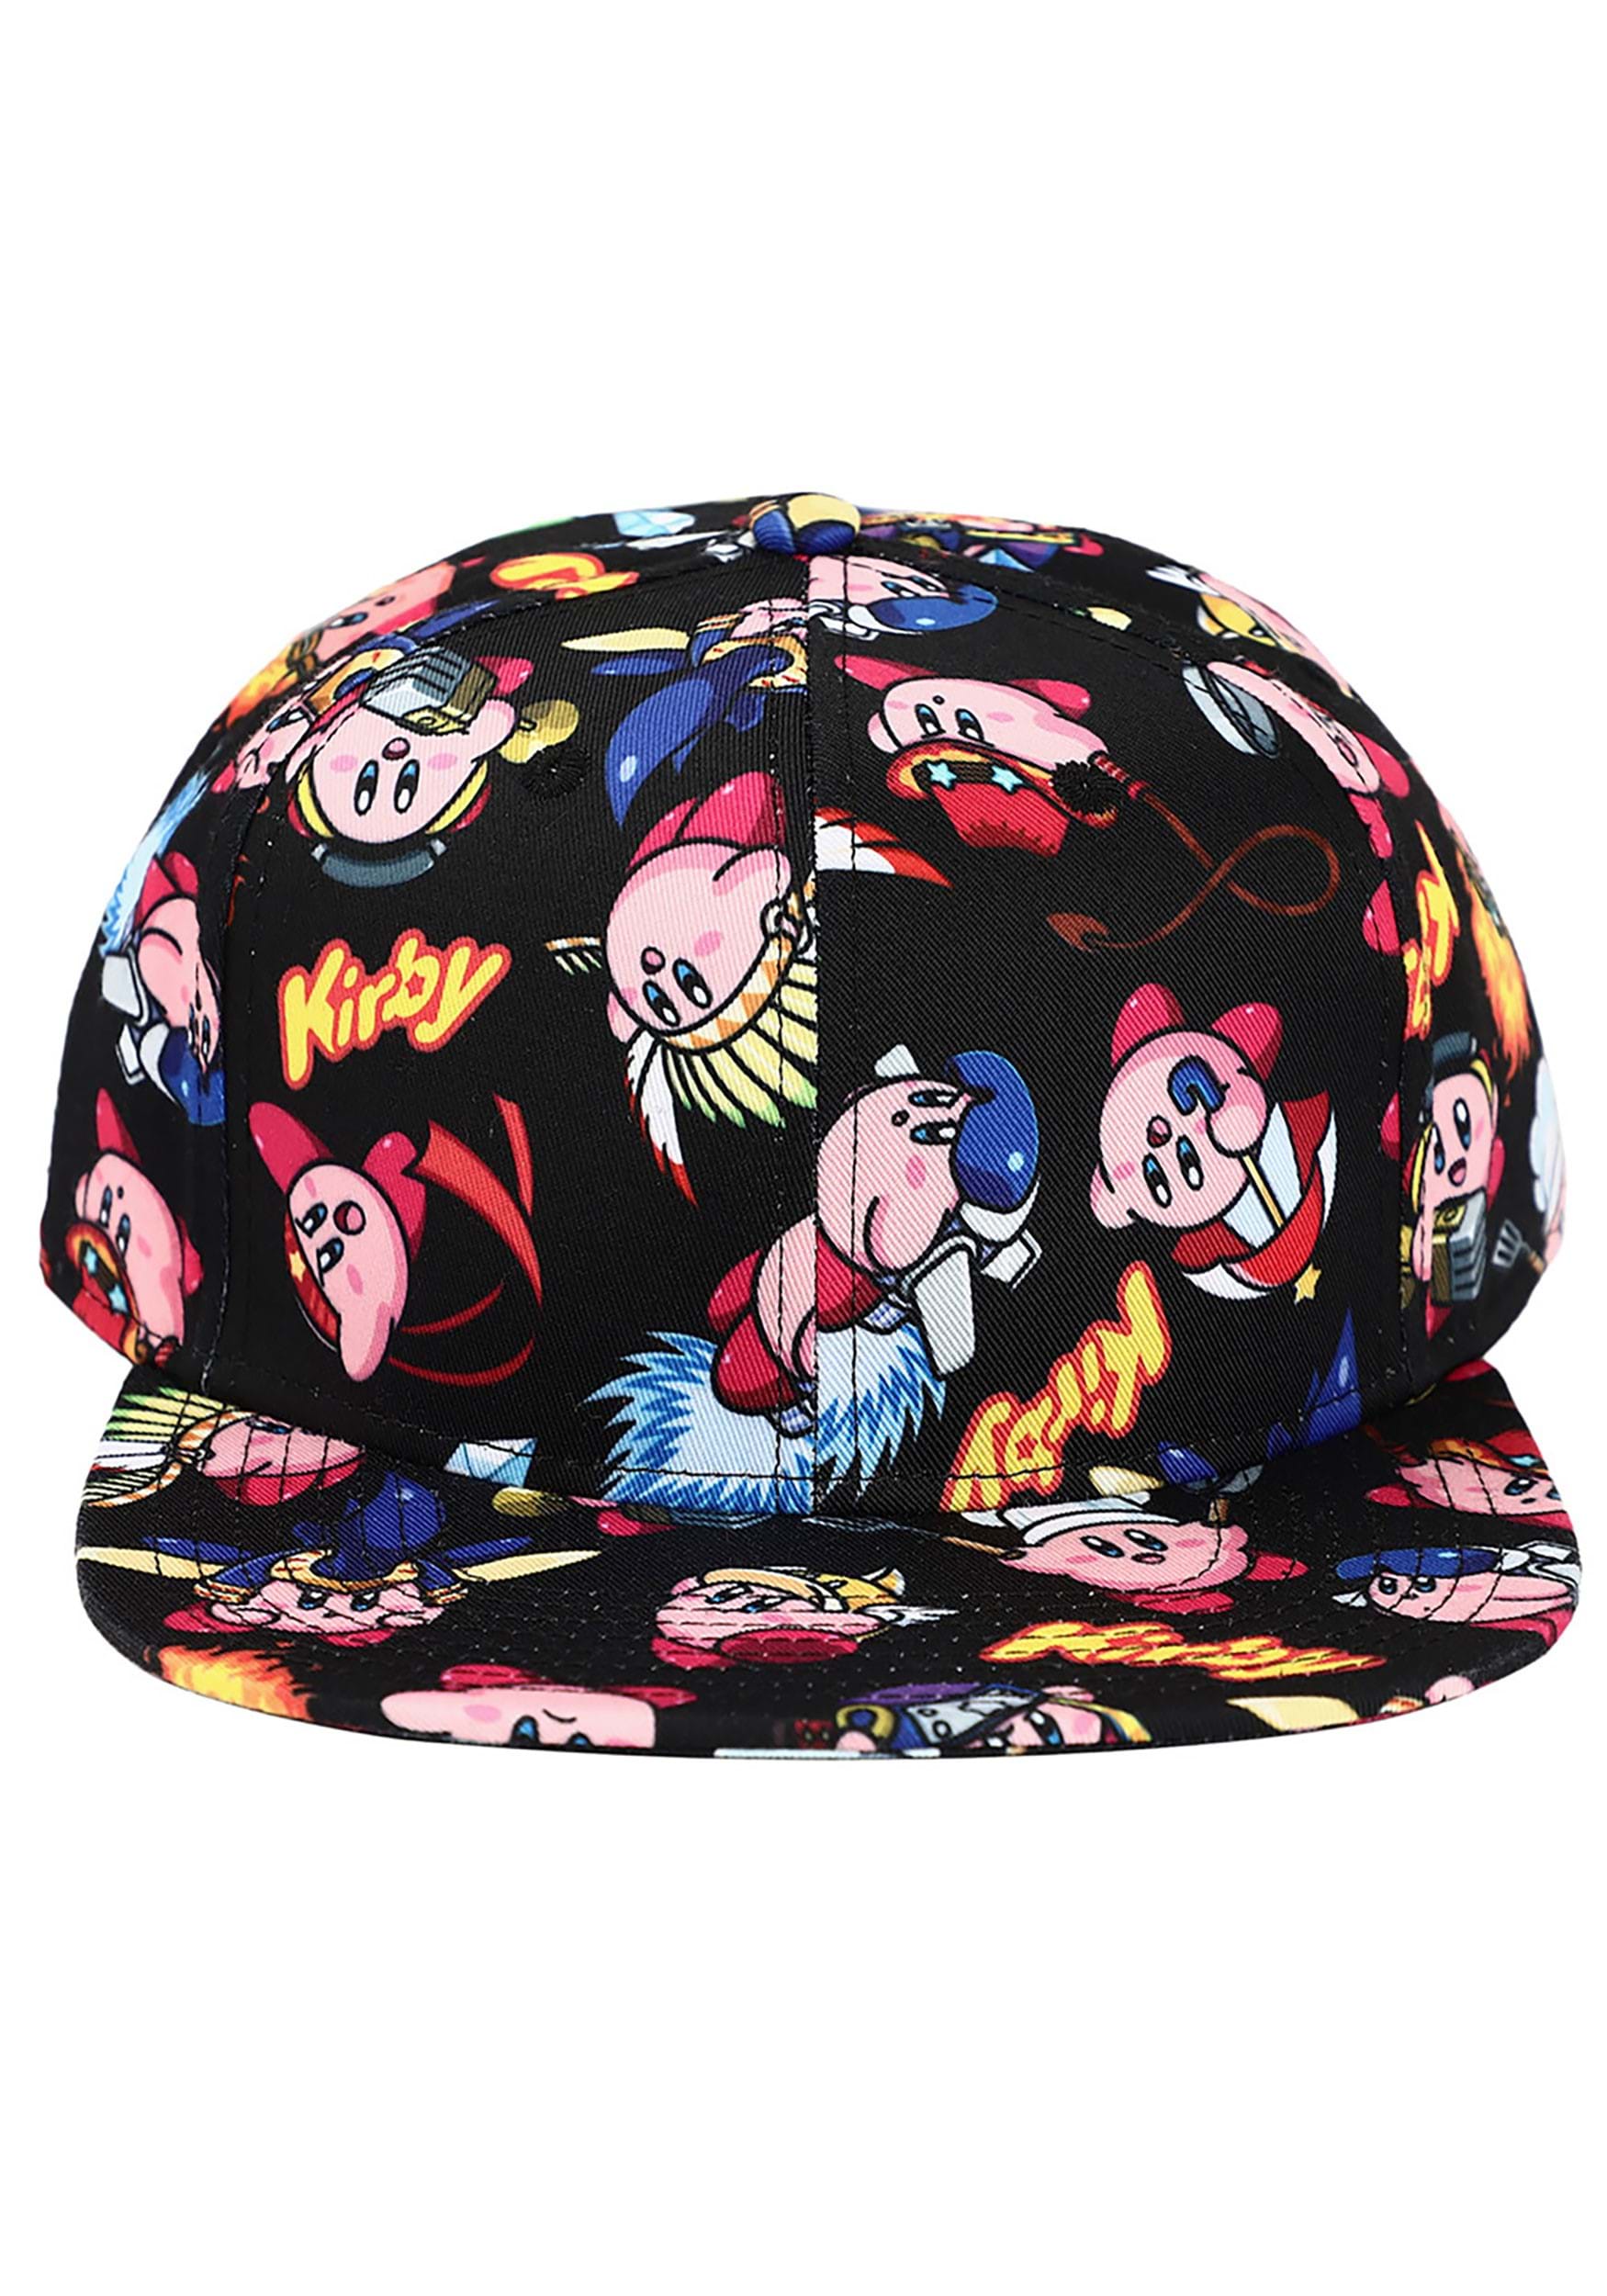 Powered Up Kirby Sublimated AOP Snapback Hat